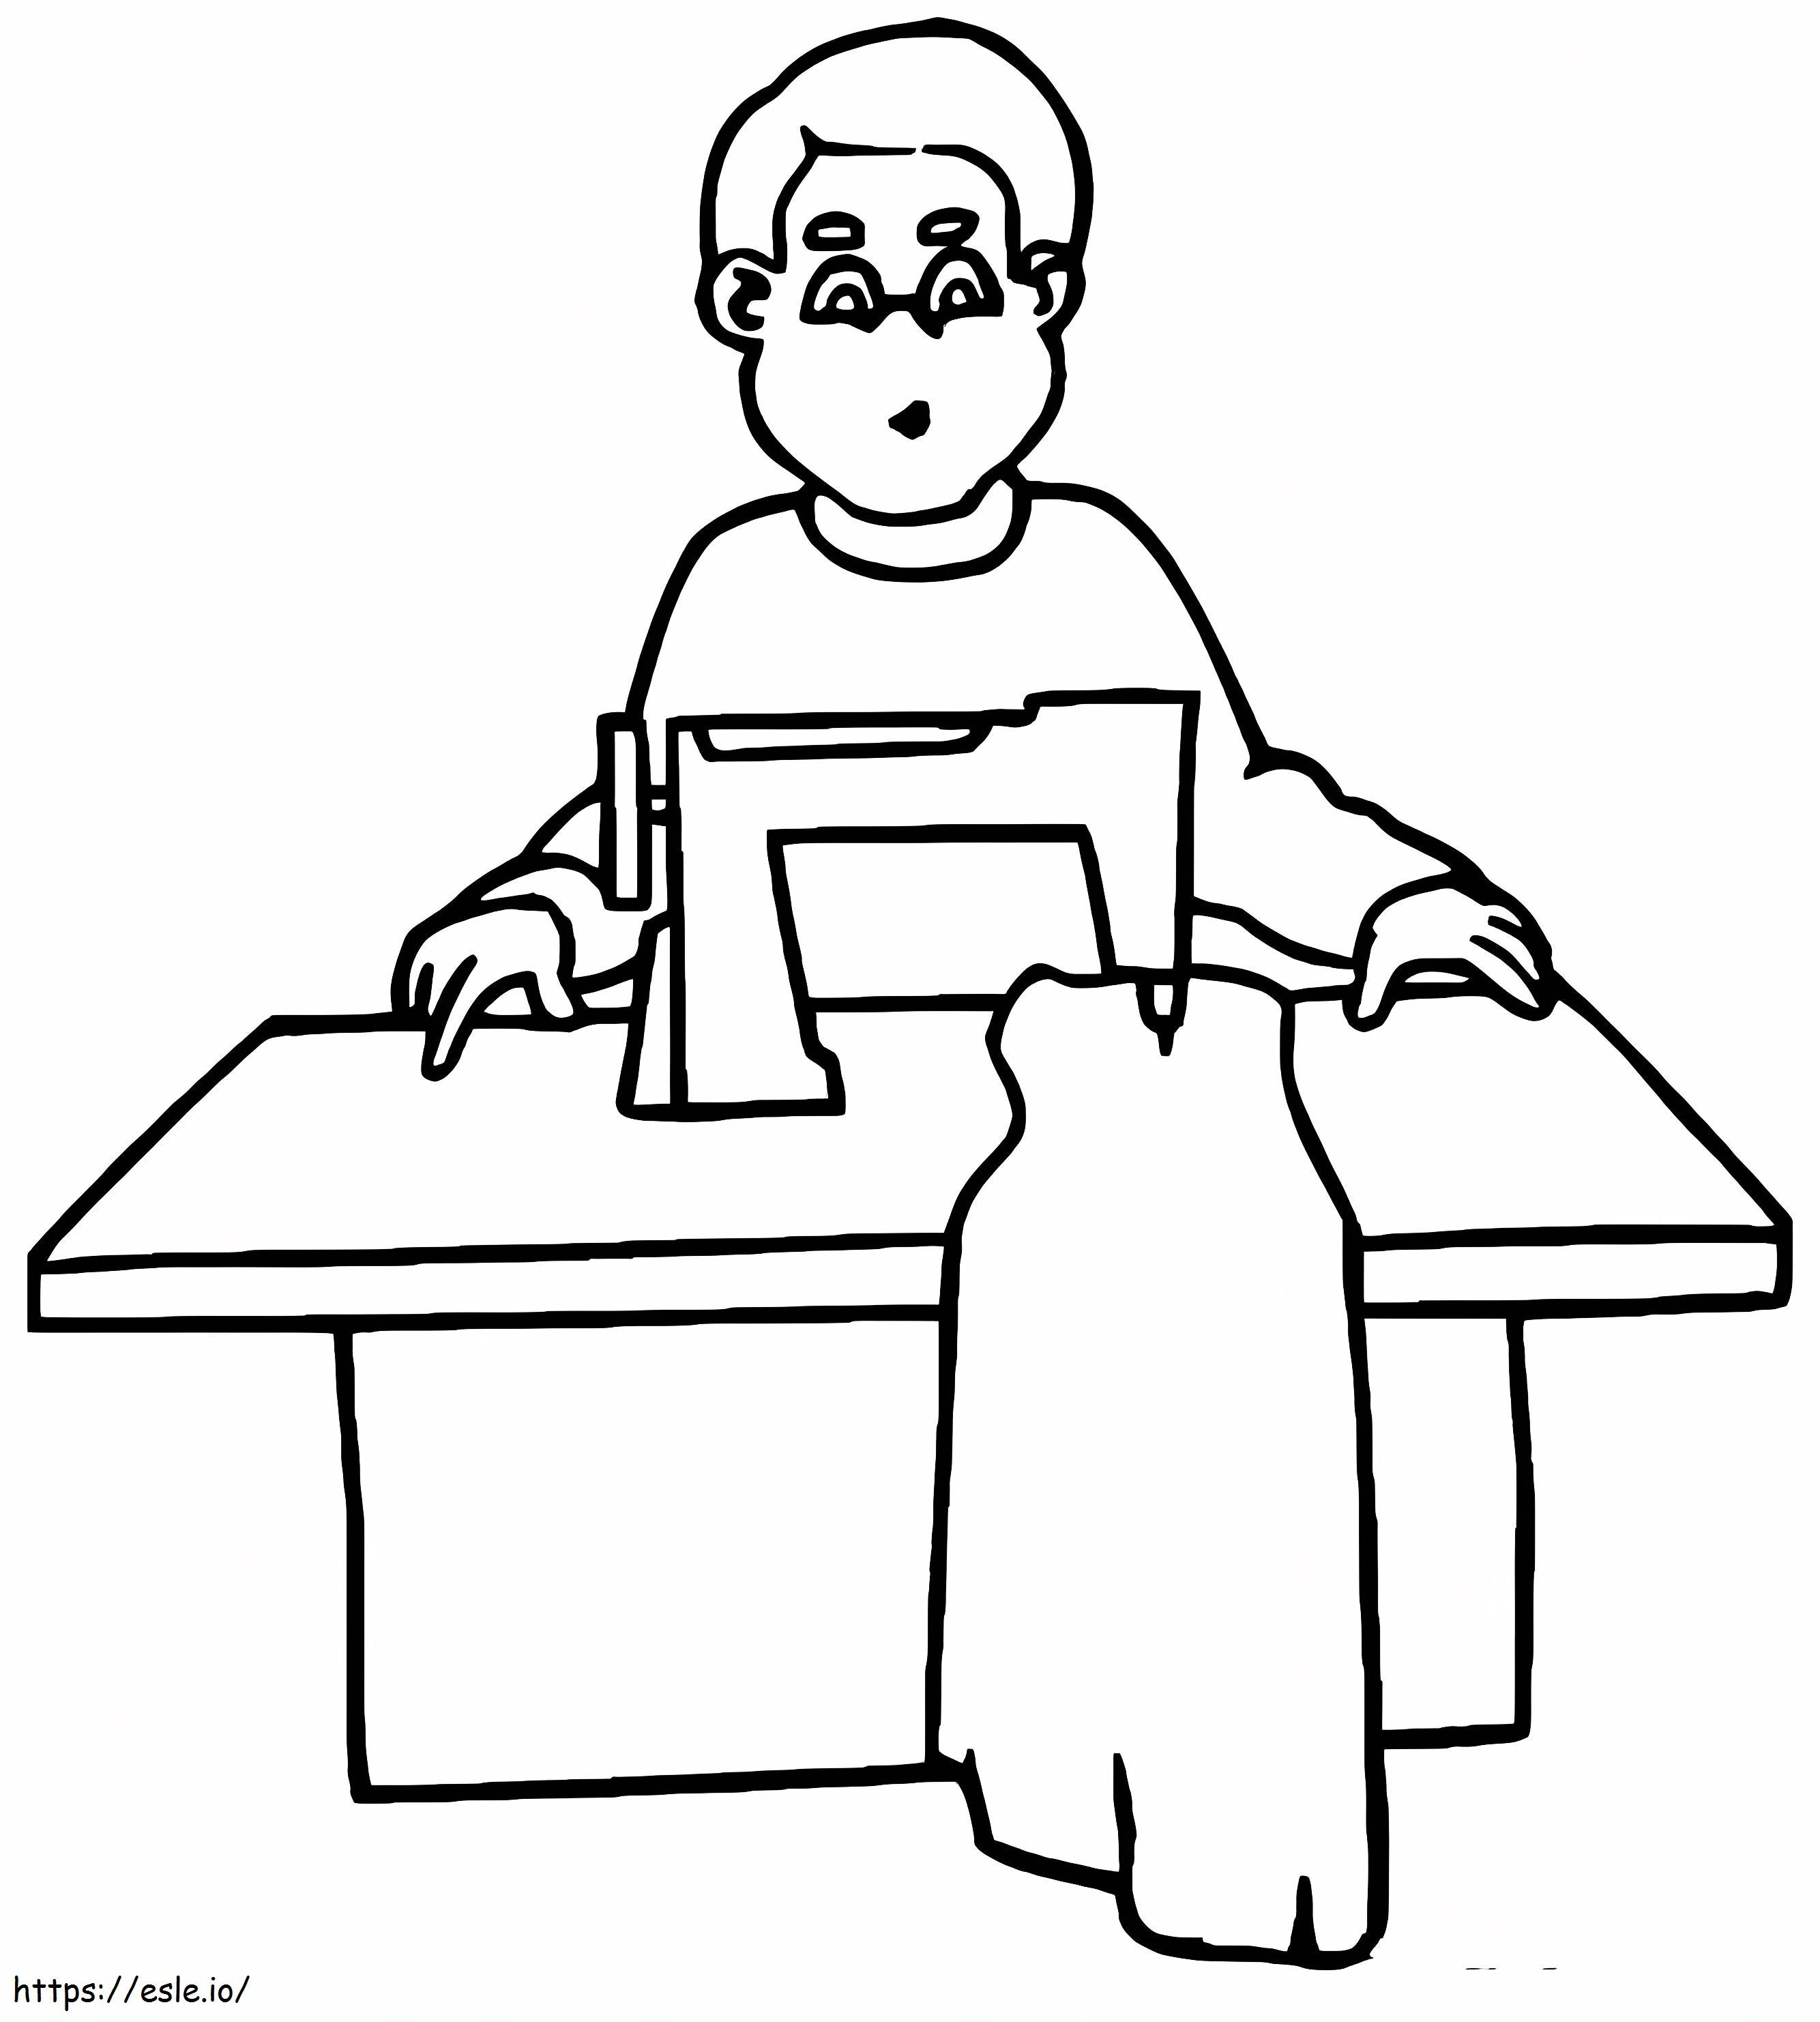 Tailor 1 coloring page